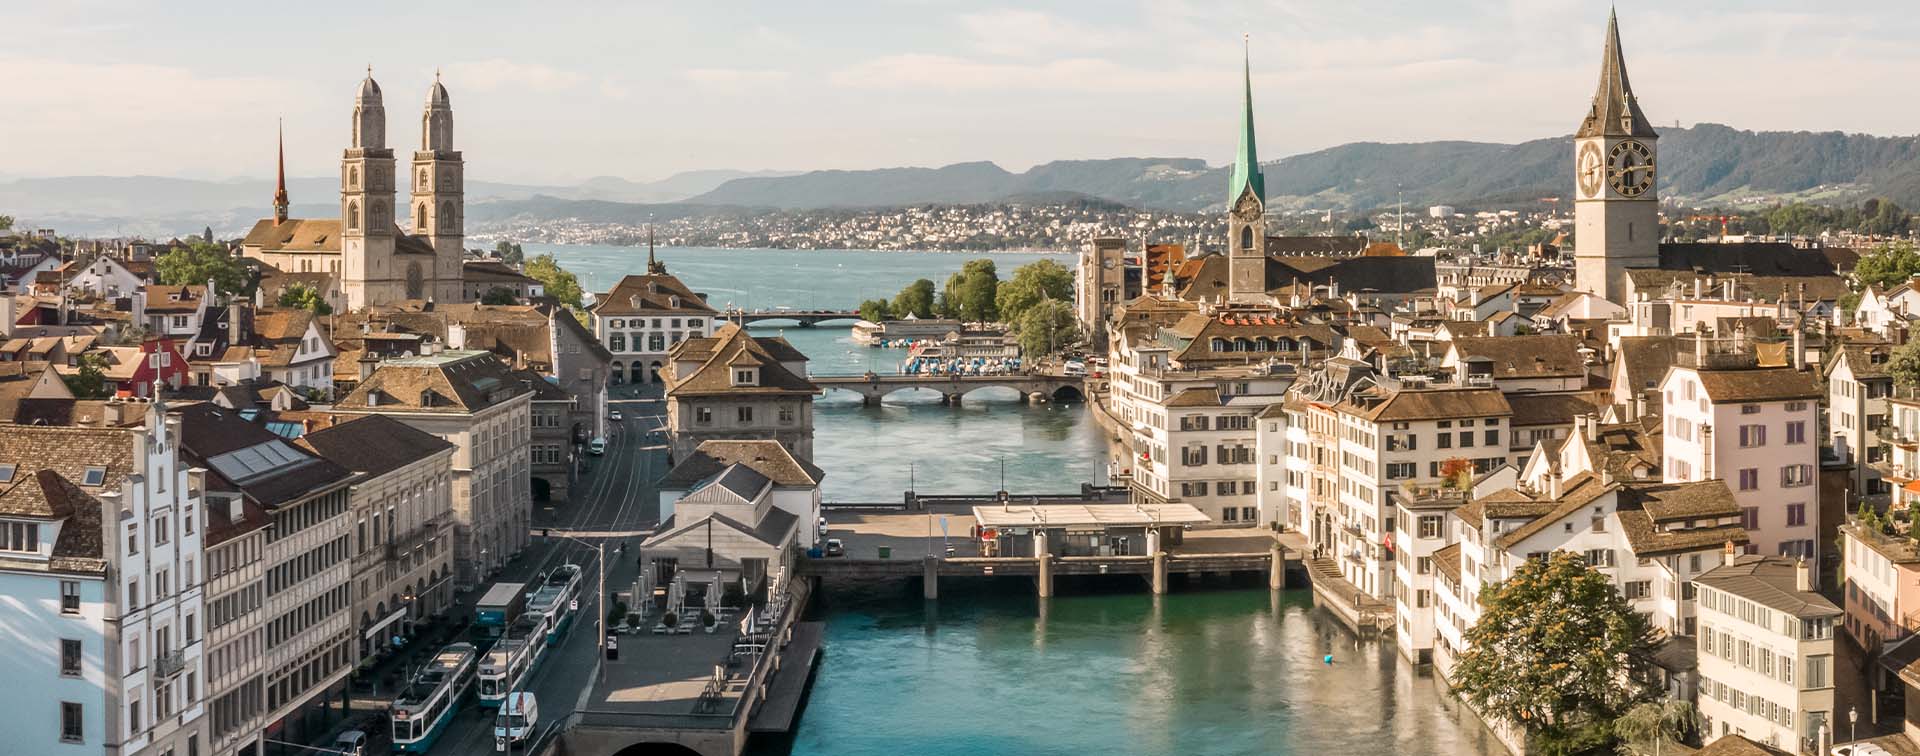 Skyline of Zurich old town by the Limmat river on a sunny summer day in Switzerland